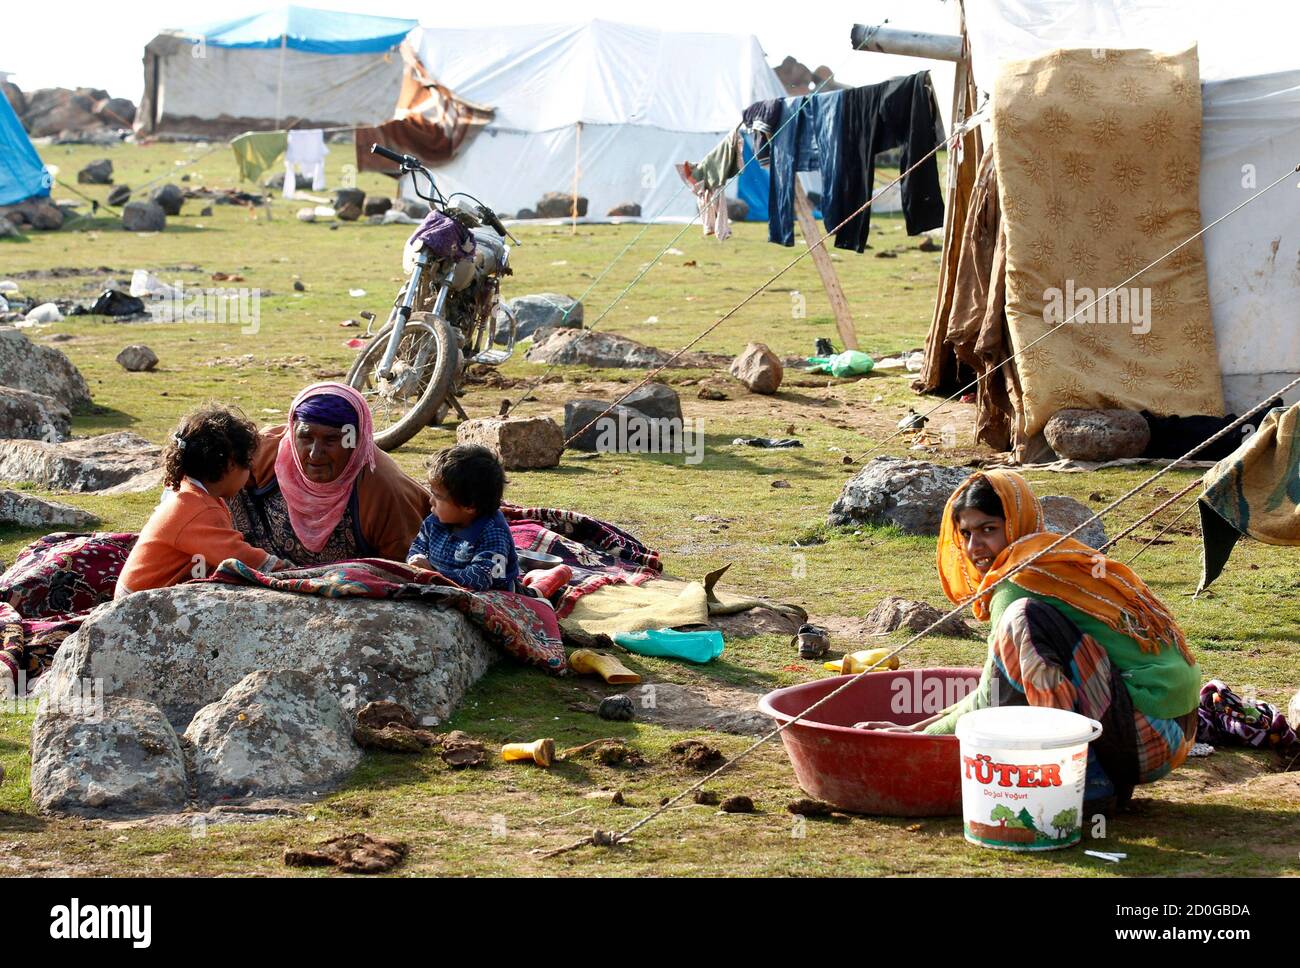 A Syrian refugee woman washes clothes near her family in front of their  makeshift tent in the town of Viransehir in Sanliurfa province, southeast  Turkey, February 10, 2013. Some 50 families, mostly